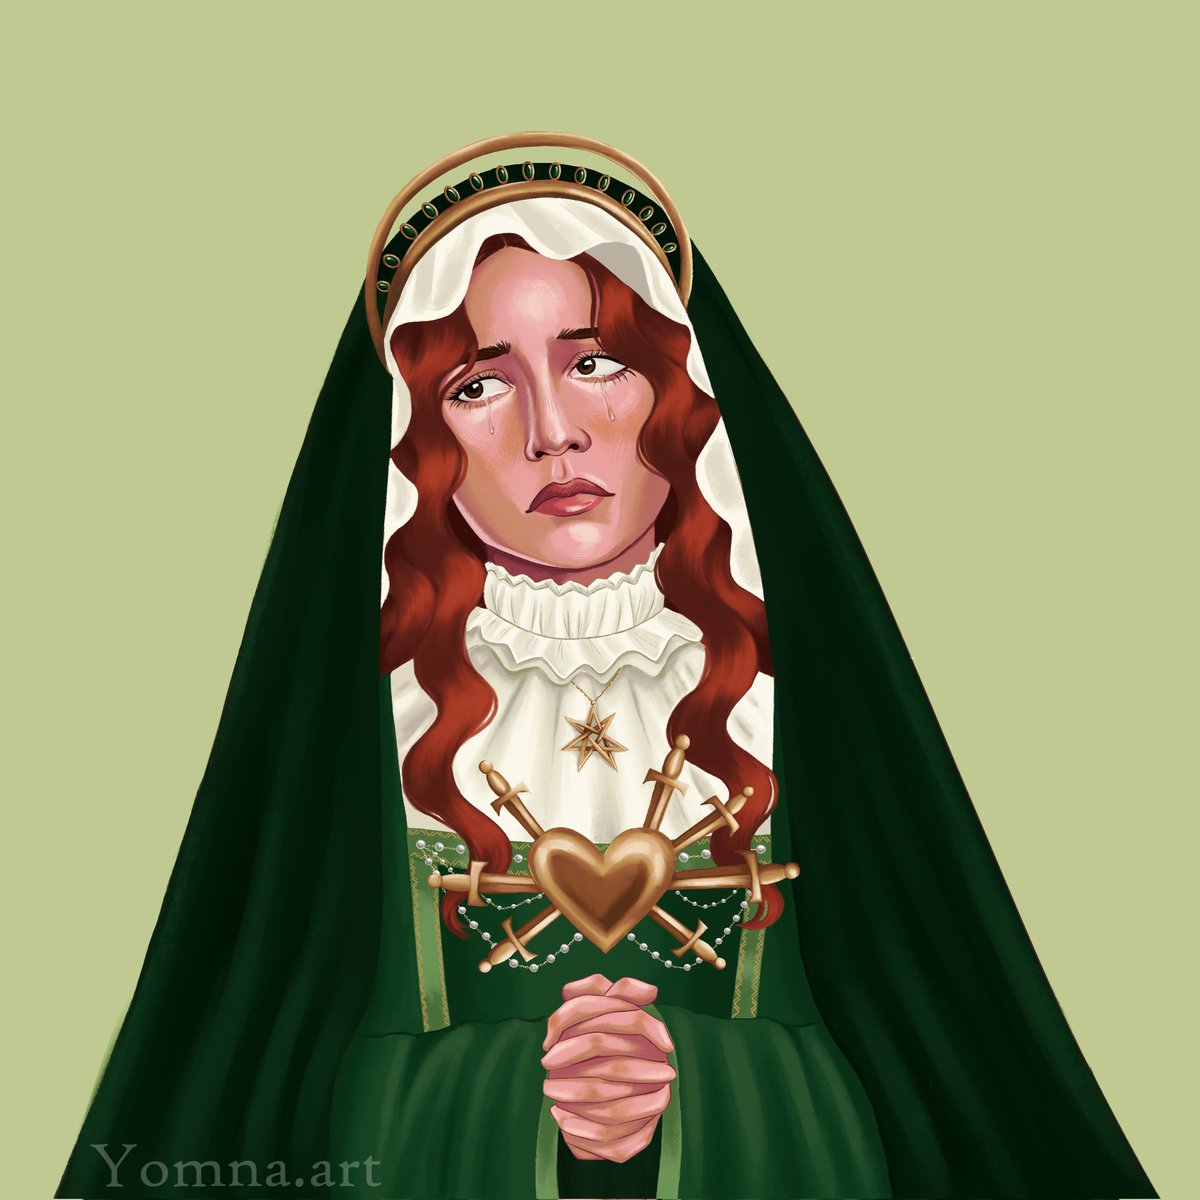 Mother Of Sorrows

New painting study I did of Alicent. I'm really proud of how this one turned out and the fact that I finally decided to get out of my comfort zone.
.
#hotdfanart #alicenthightower #teamgreen #hotd #ArtistOnTwitter #asoiaf #oliviacooke